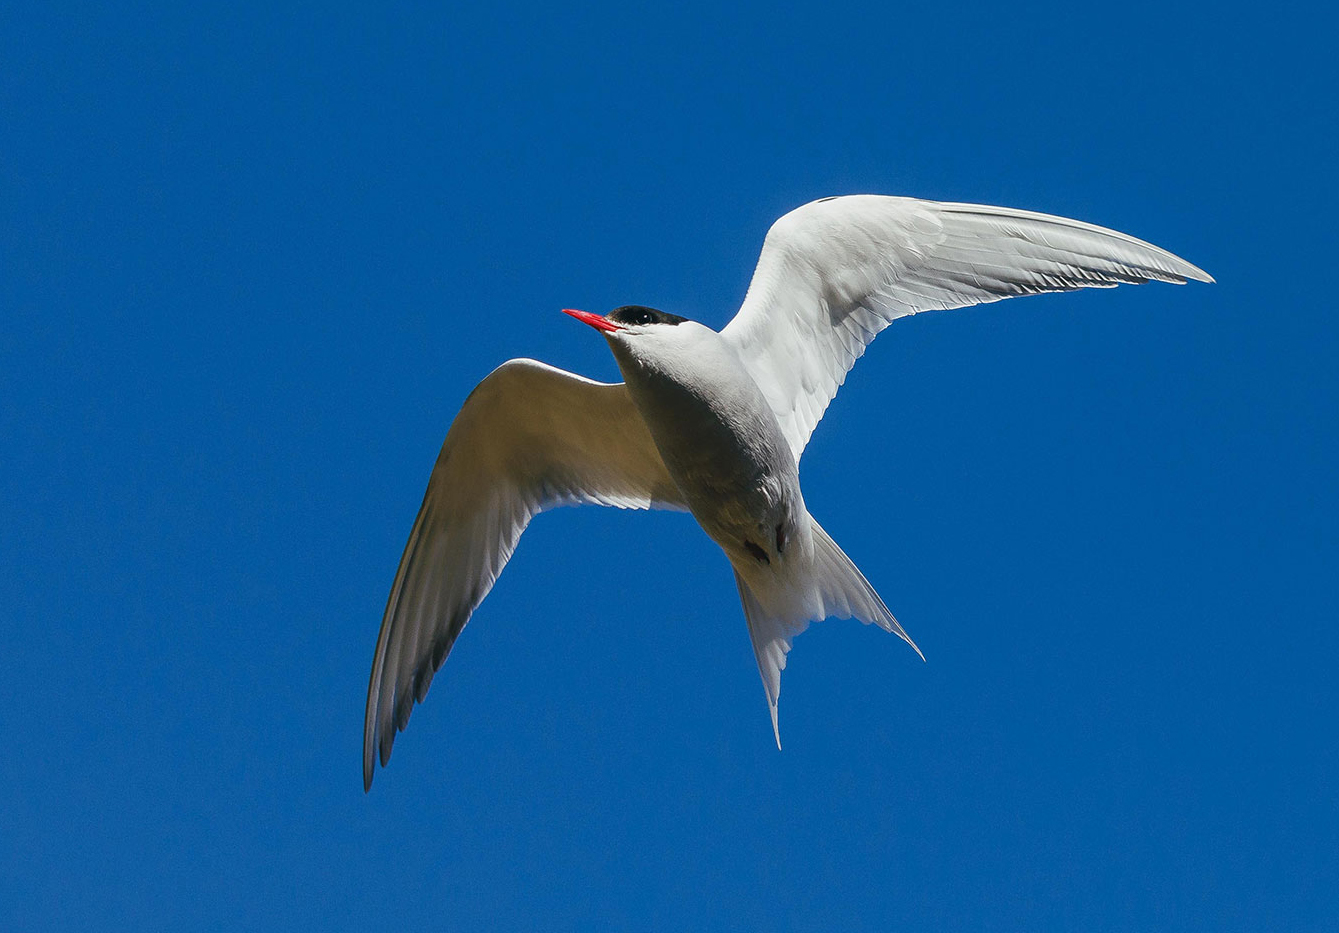 The Antarctic Tern, also known as the Arctic Tern. It thrives in both poles